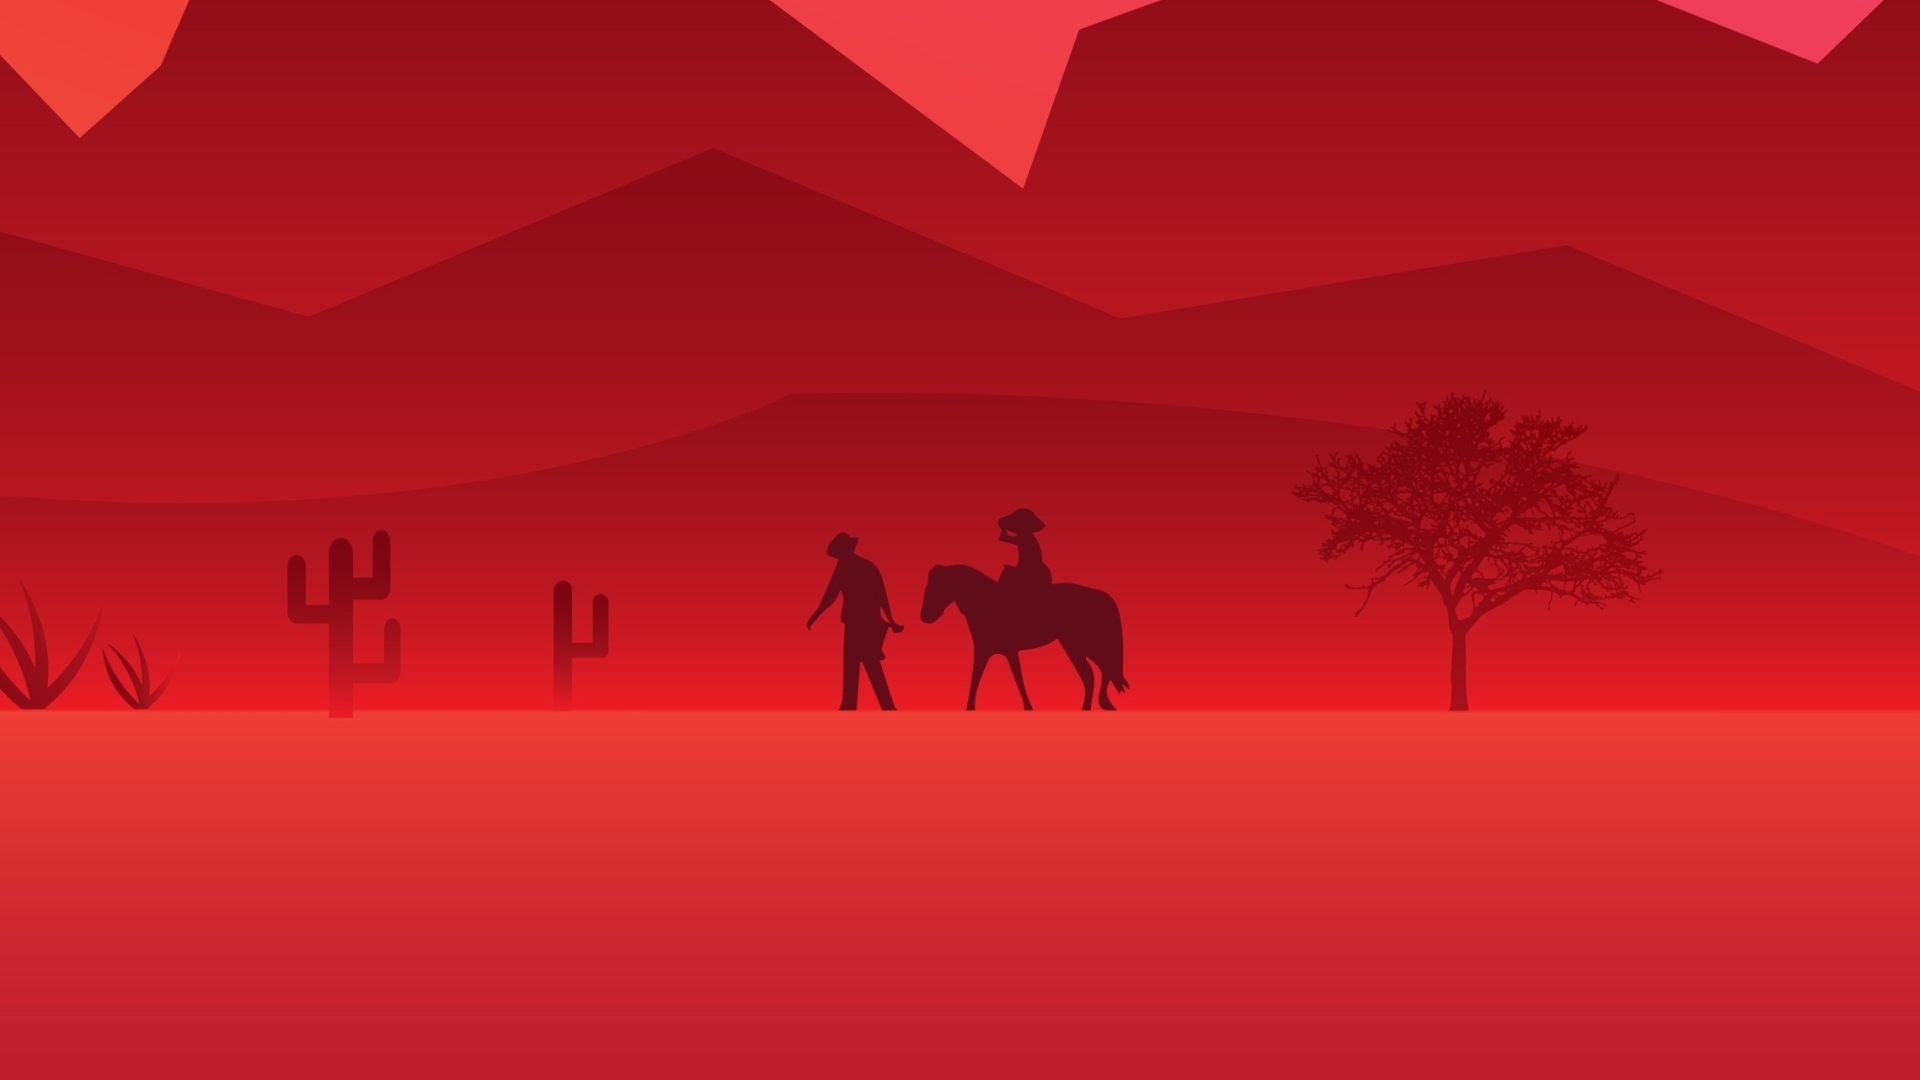 1920x1080 Red Dead Redemption 2 Minimal Game 19 1080p Laptop Full